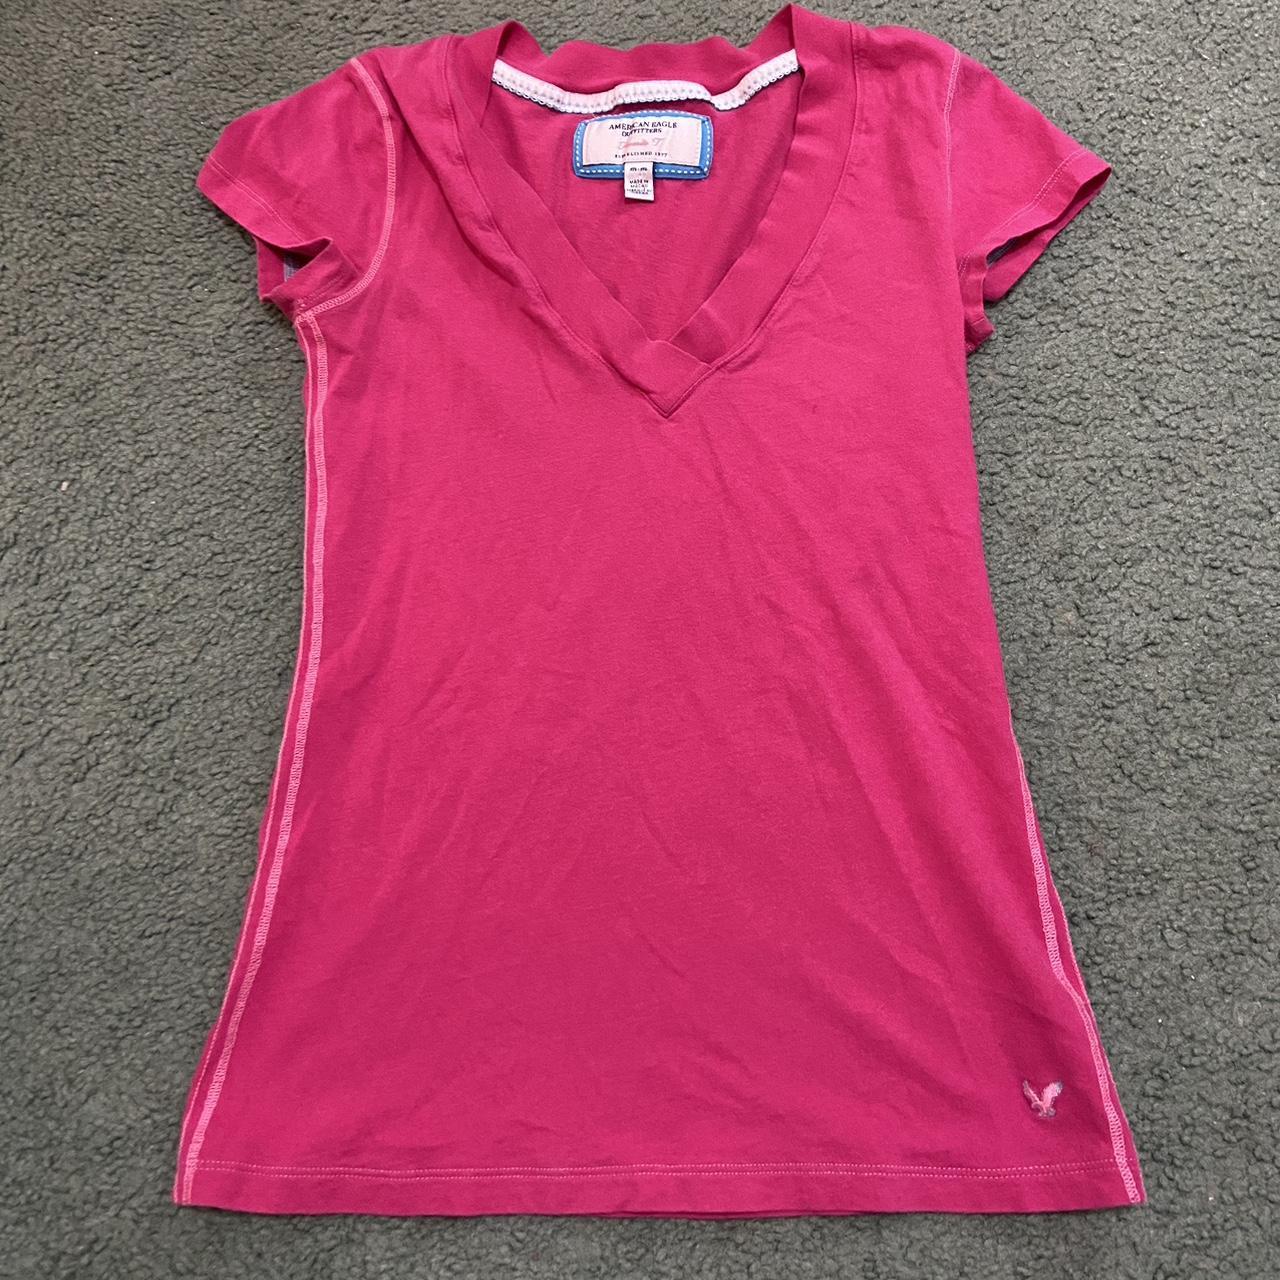 American Eagle Outfitters Women's Pink Shirt